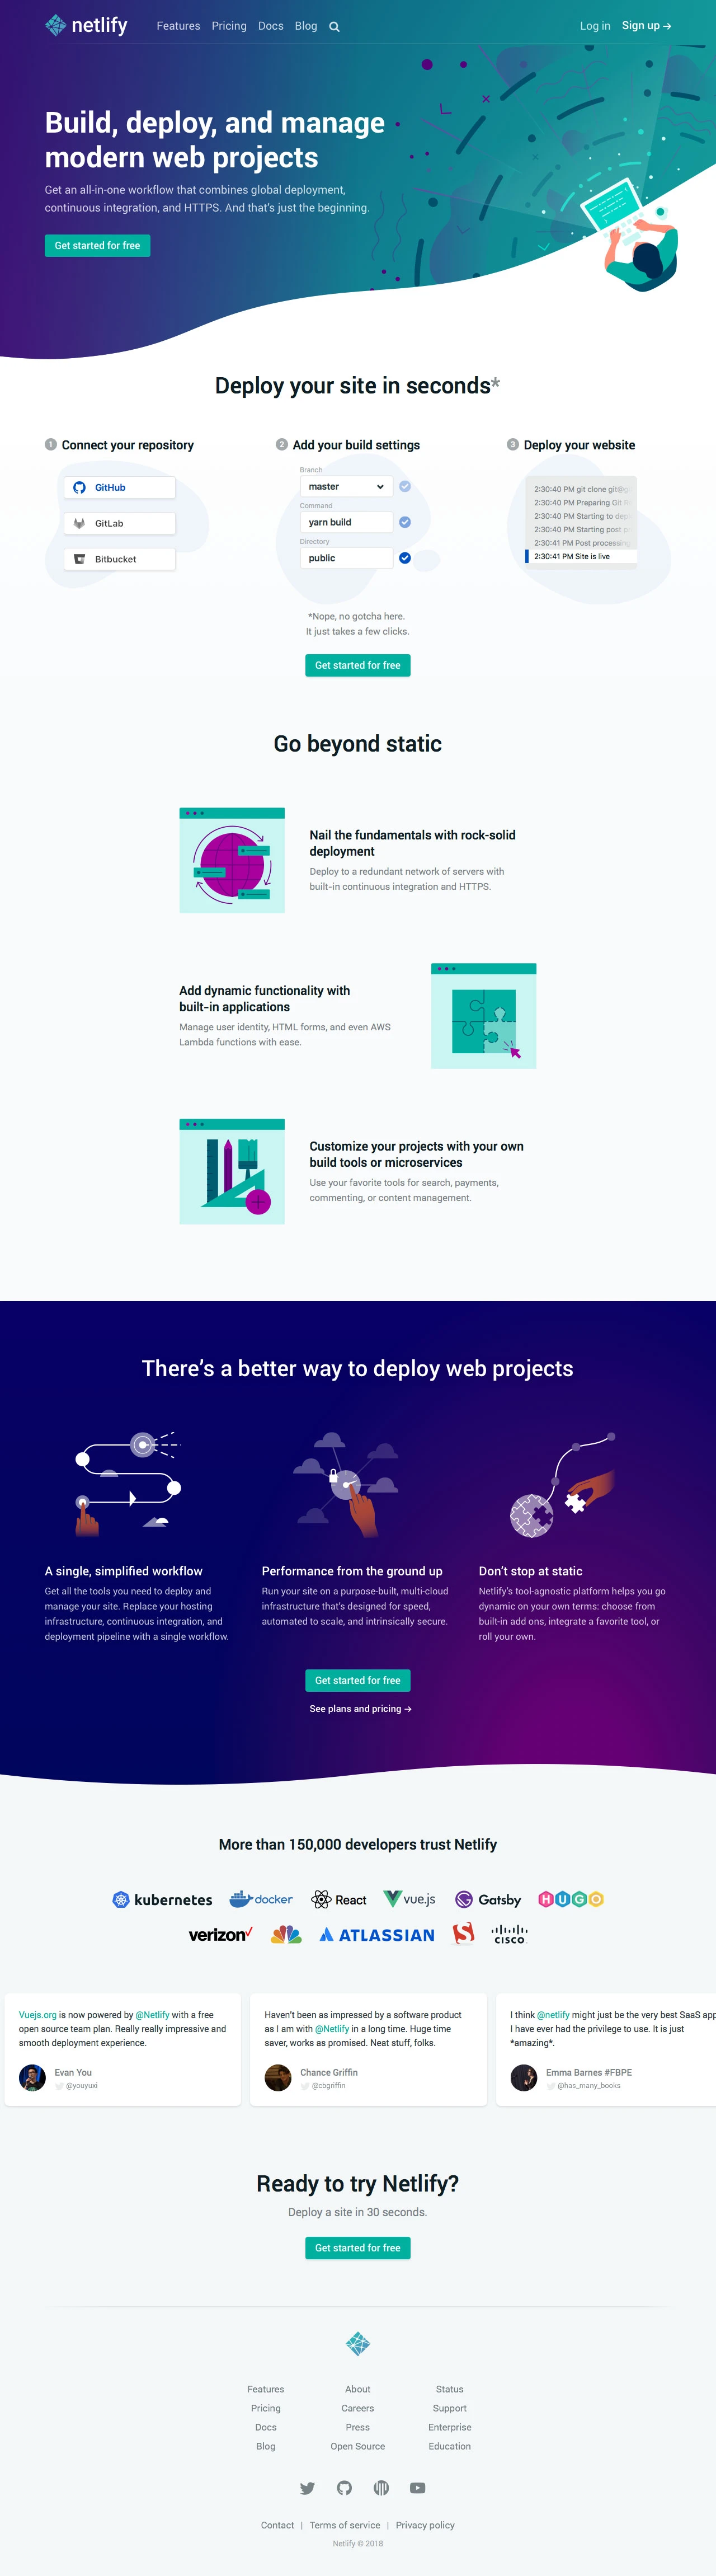 Netlify Landing Page Example: All-in-one platform for automating modern web projects